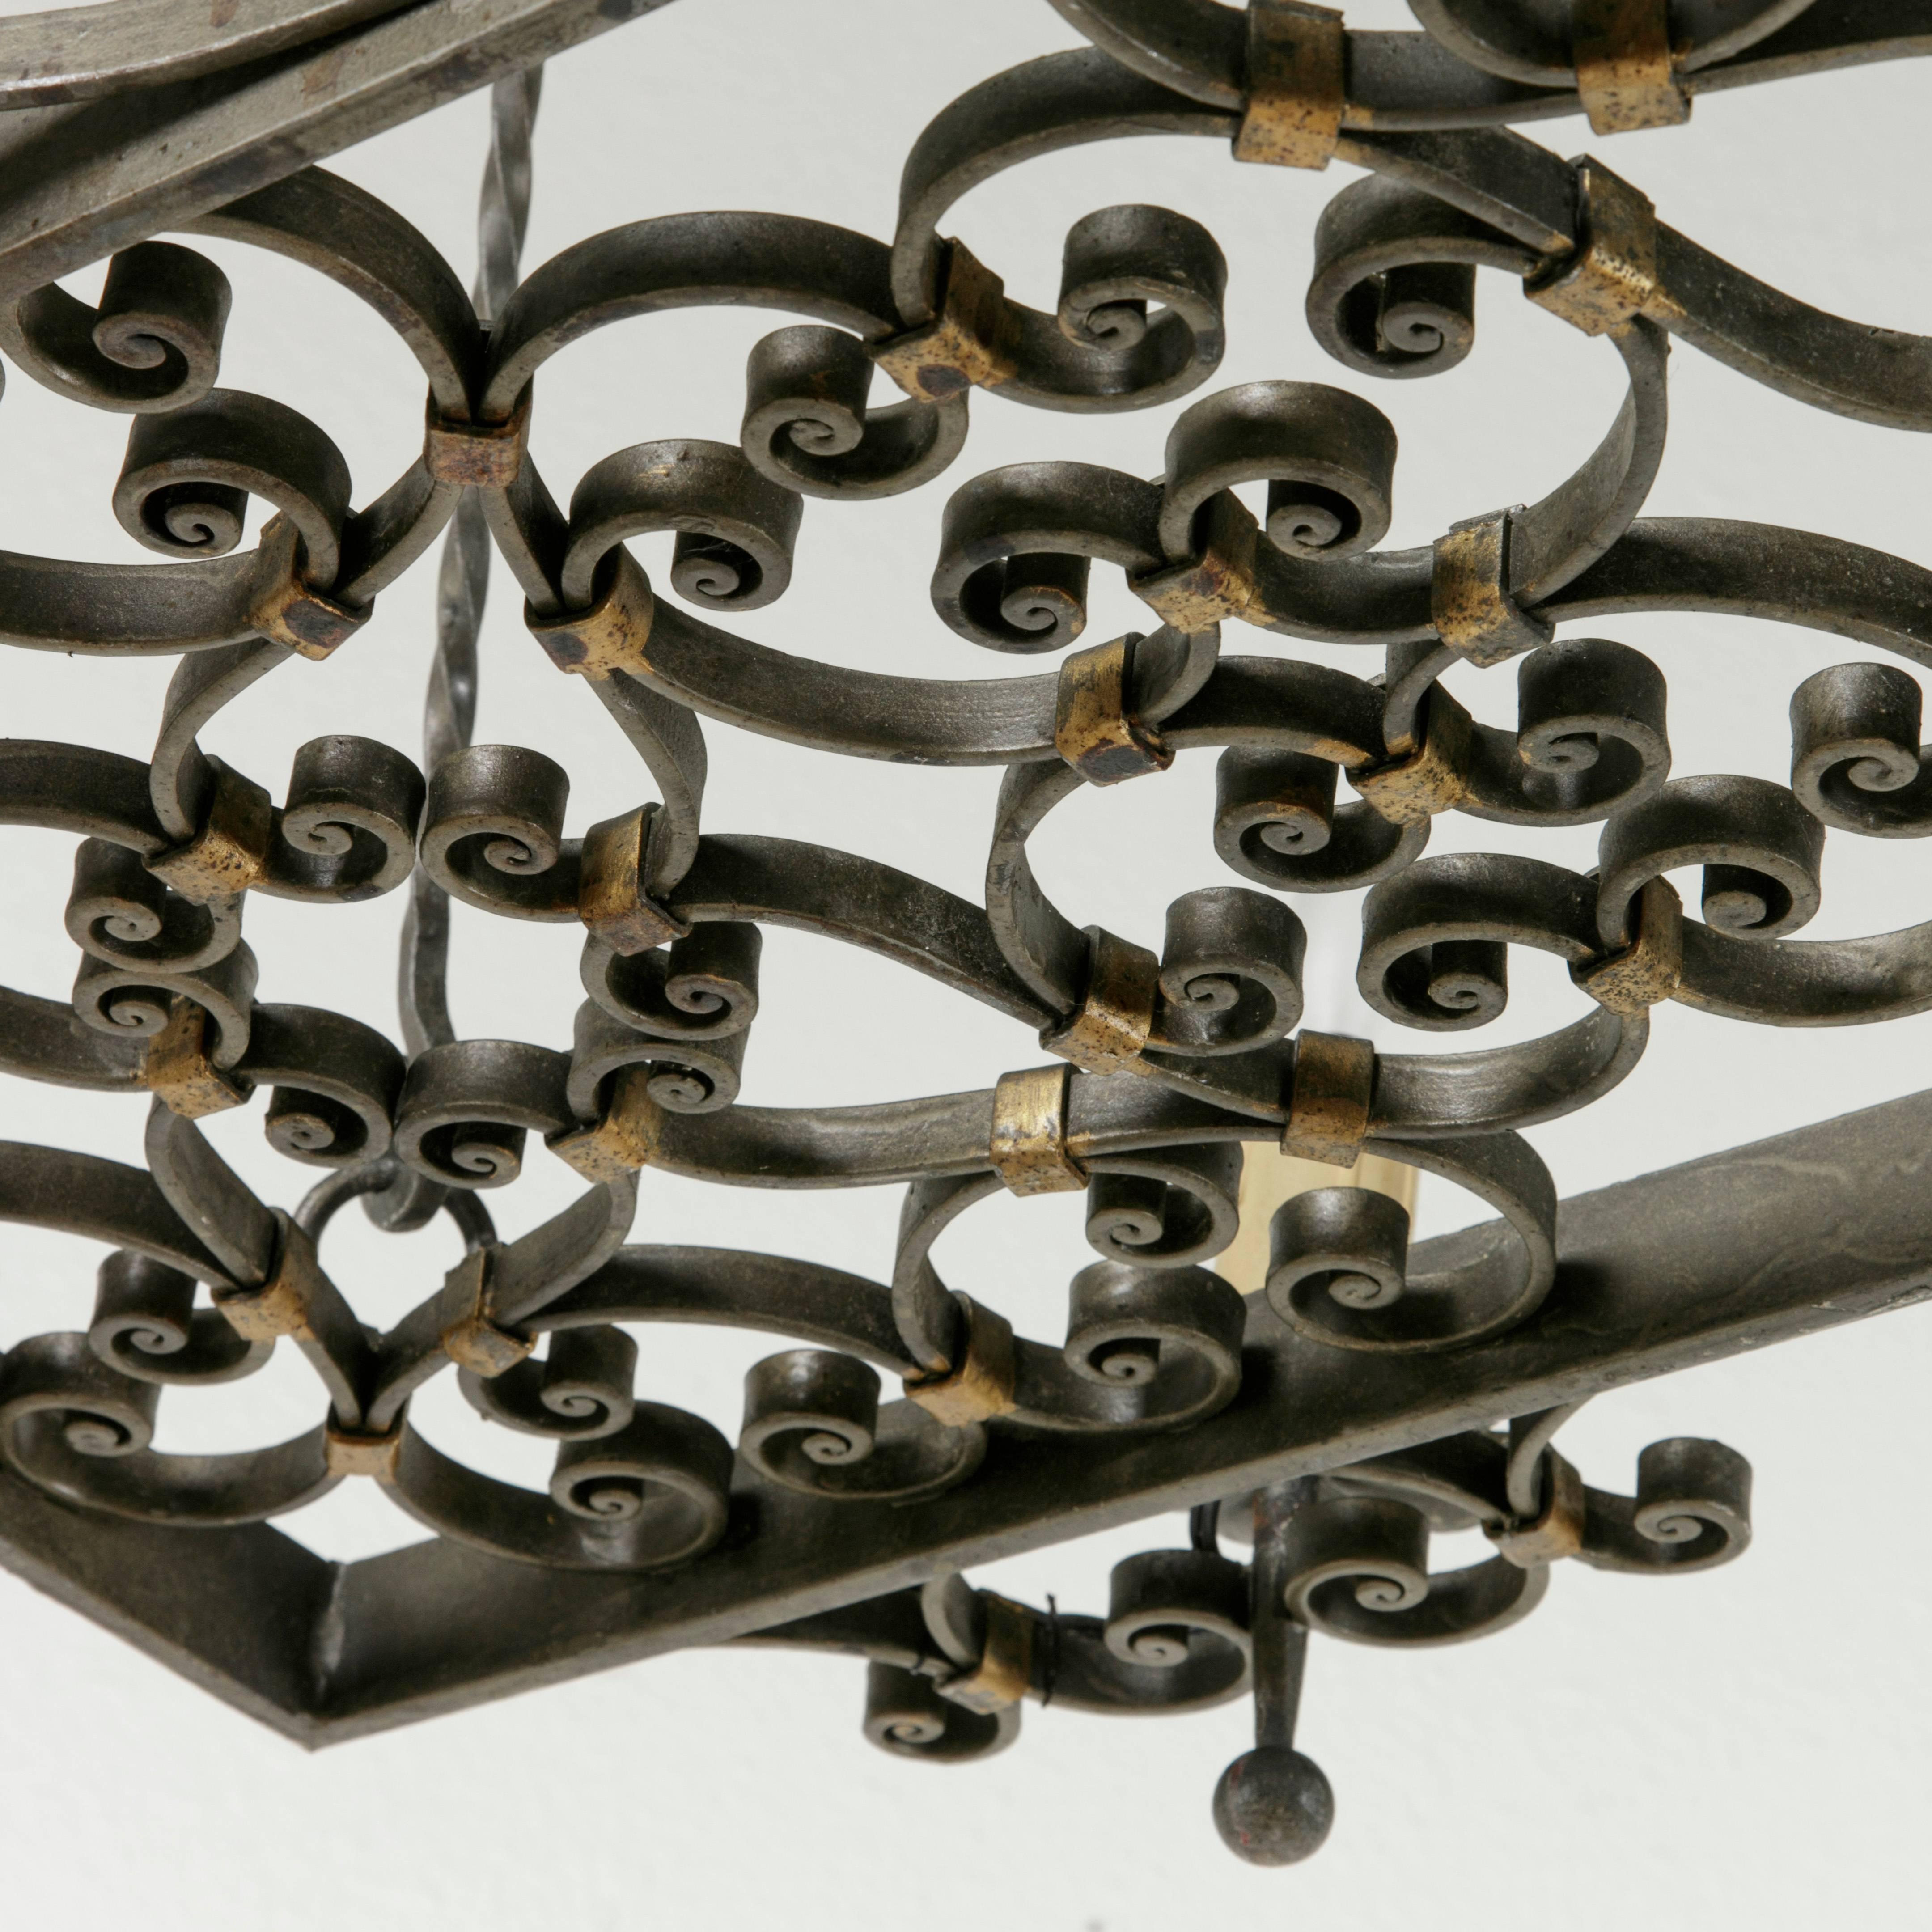 Originally from the region of Normandy, France, this iron chandelier features elegant hand-forged iron scrolling detailed with painted gold iron bands. Electrified to American standards, this chandelier has six lights that line the outer edge of its